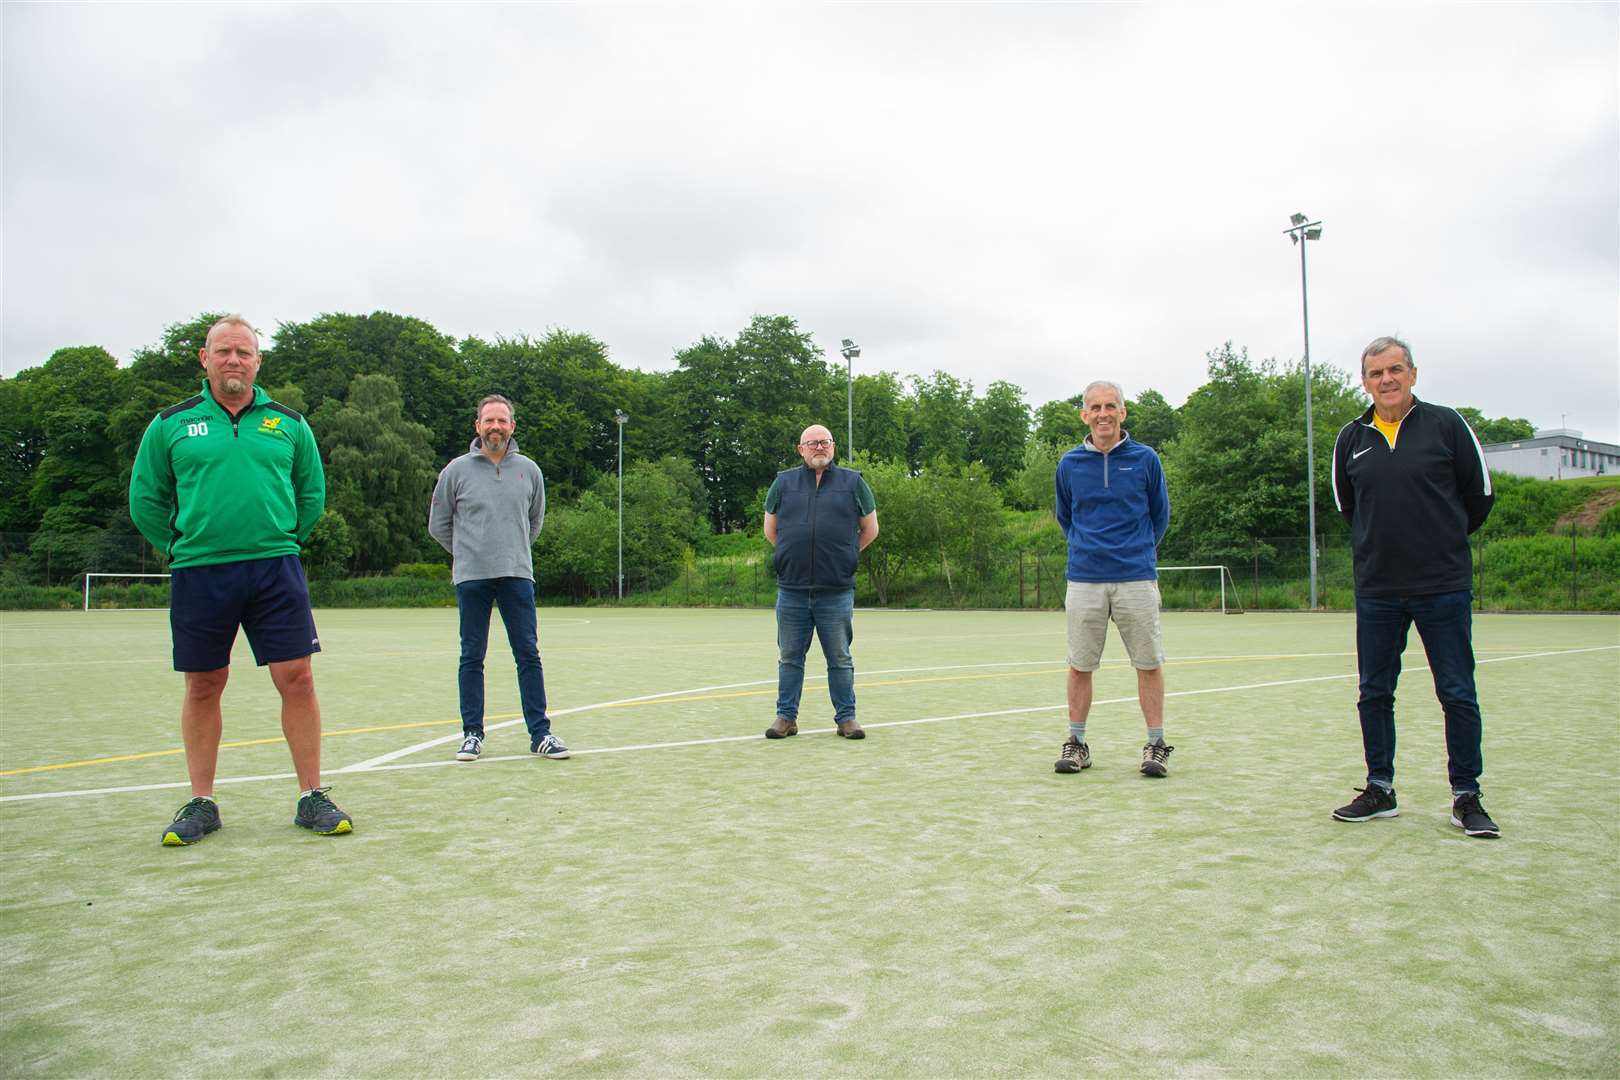 Members of the Huntly Sports Trust, from the left, Chris Lee, Dave Liston, Bruce Murray, Ian Little and Allan Mitchell at the all-weather pitch which is to be overhauled. Picture: Daniel Forsyth.